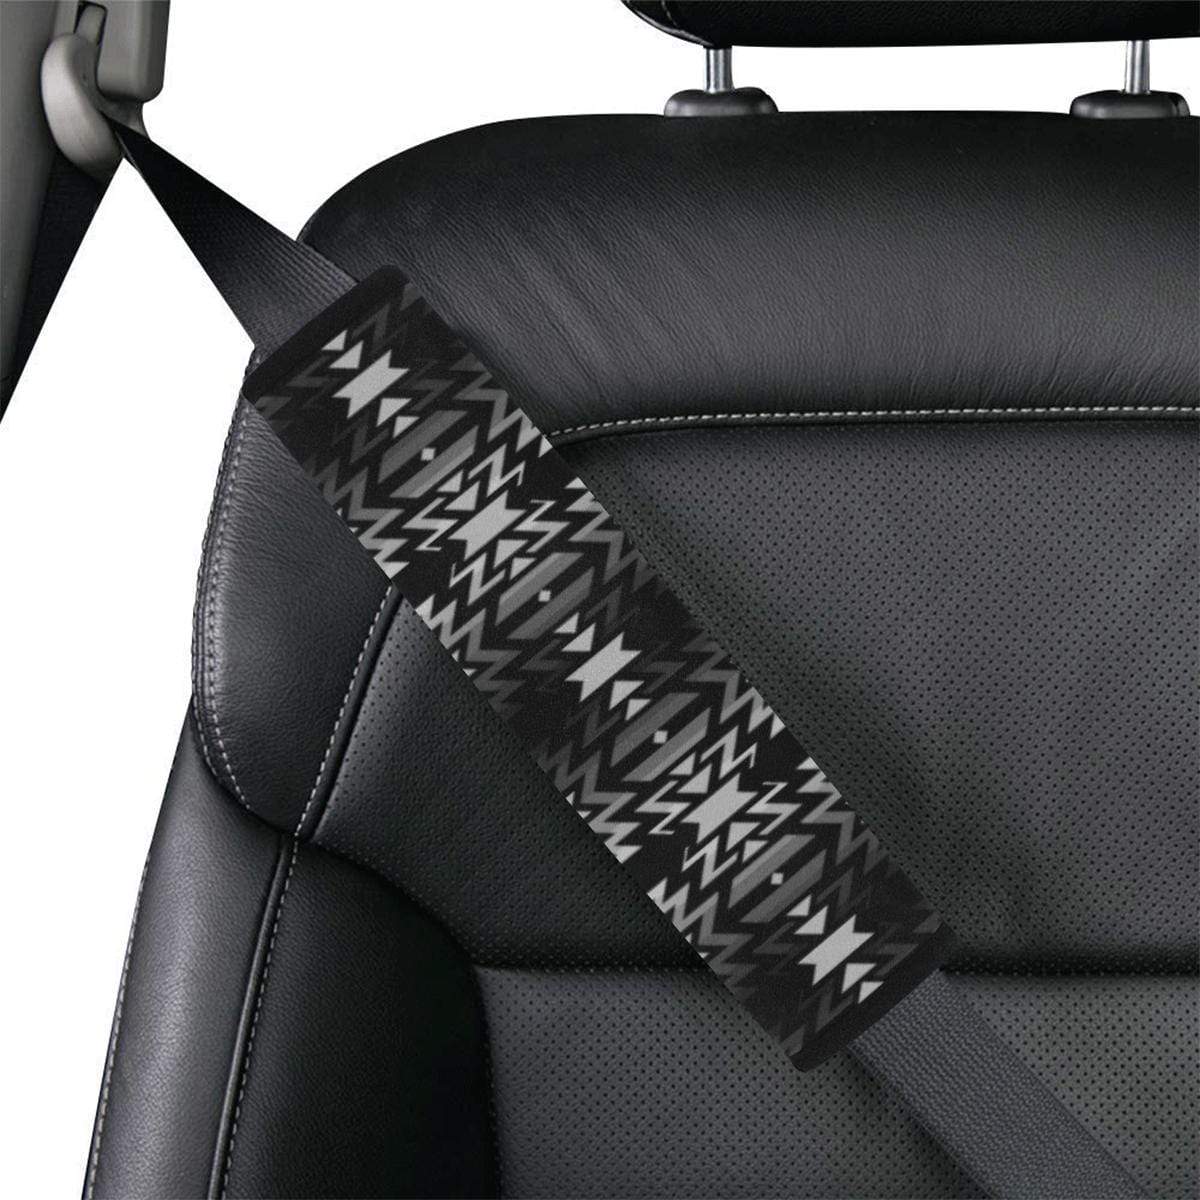 Black Fire Black and Gray Car Seat Belt Cover 7''x12.6'' Car Seat Belt Cover 7''x12.6'' e-joyer 